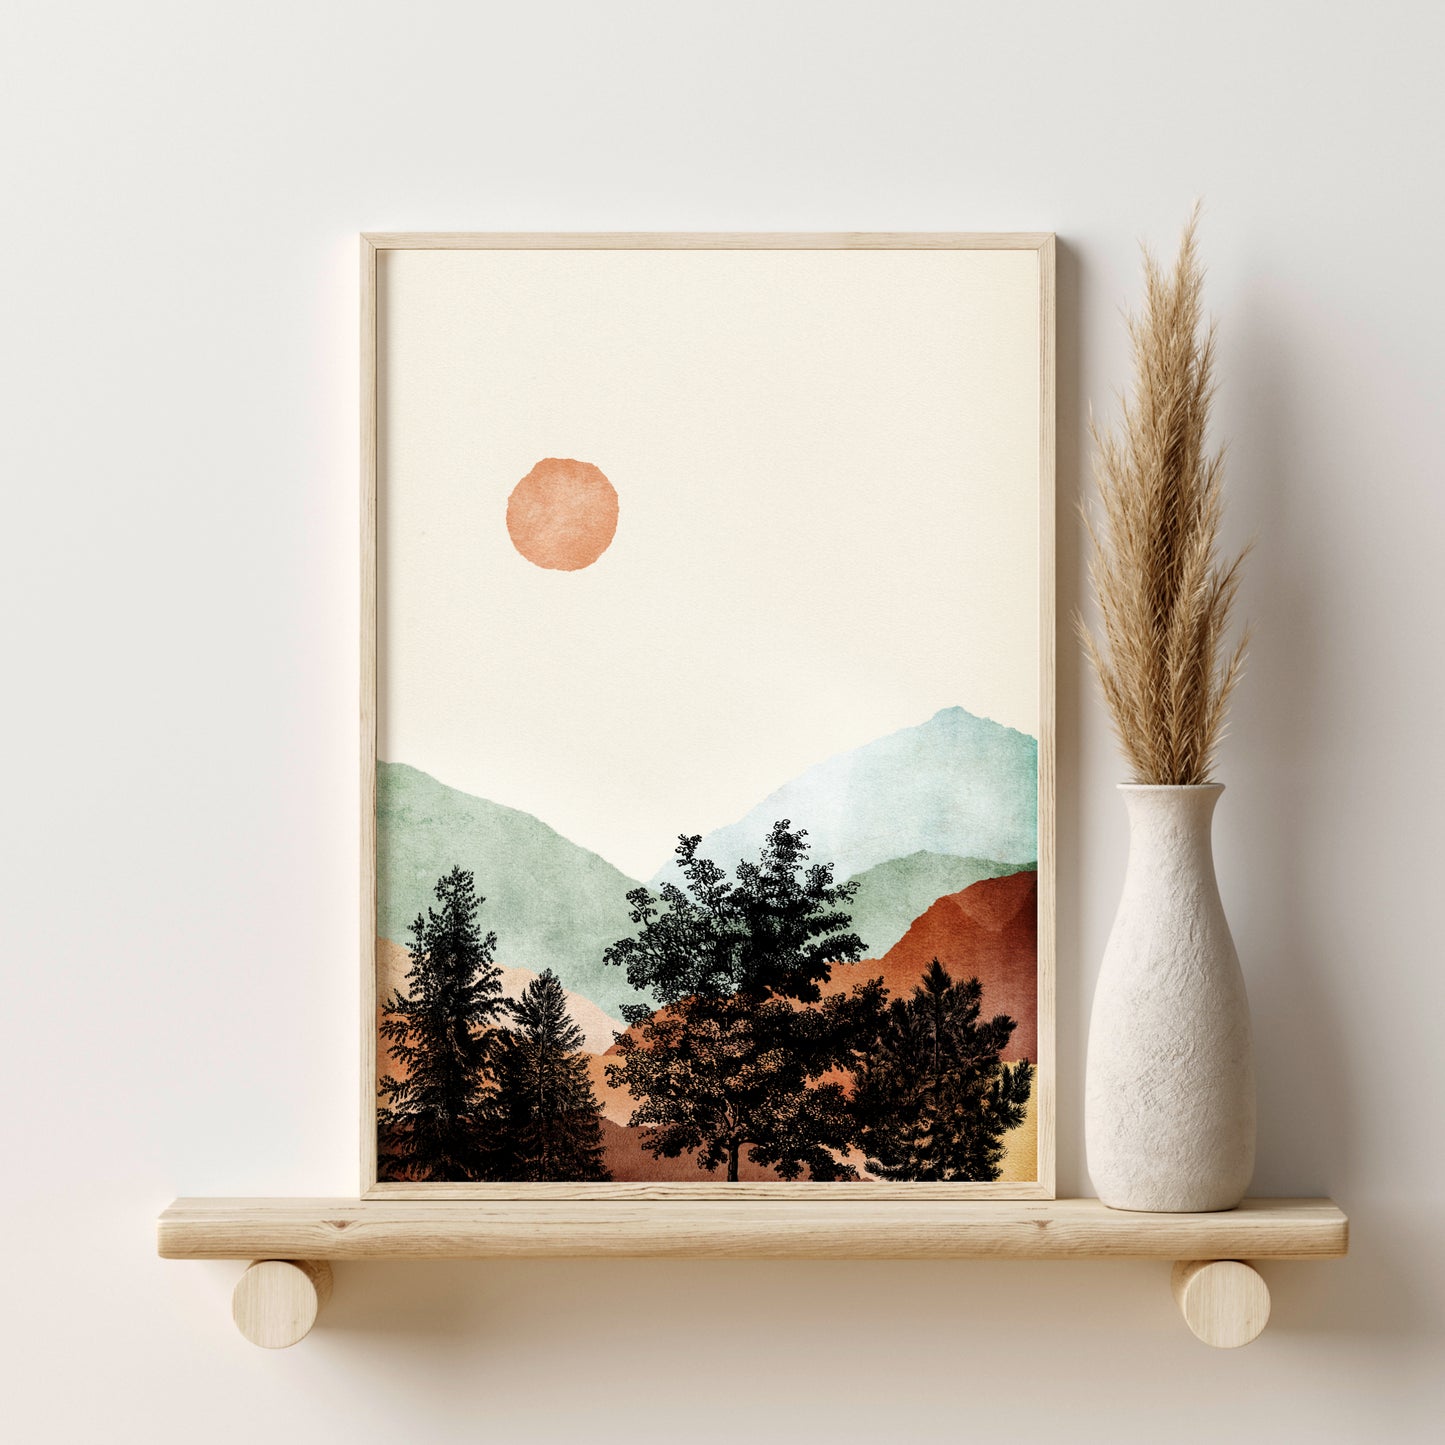 Printed Sun and Moon Landscape Wall Art Set of 4 Prints